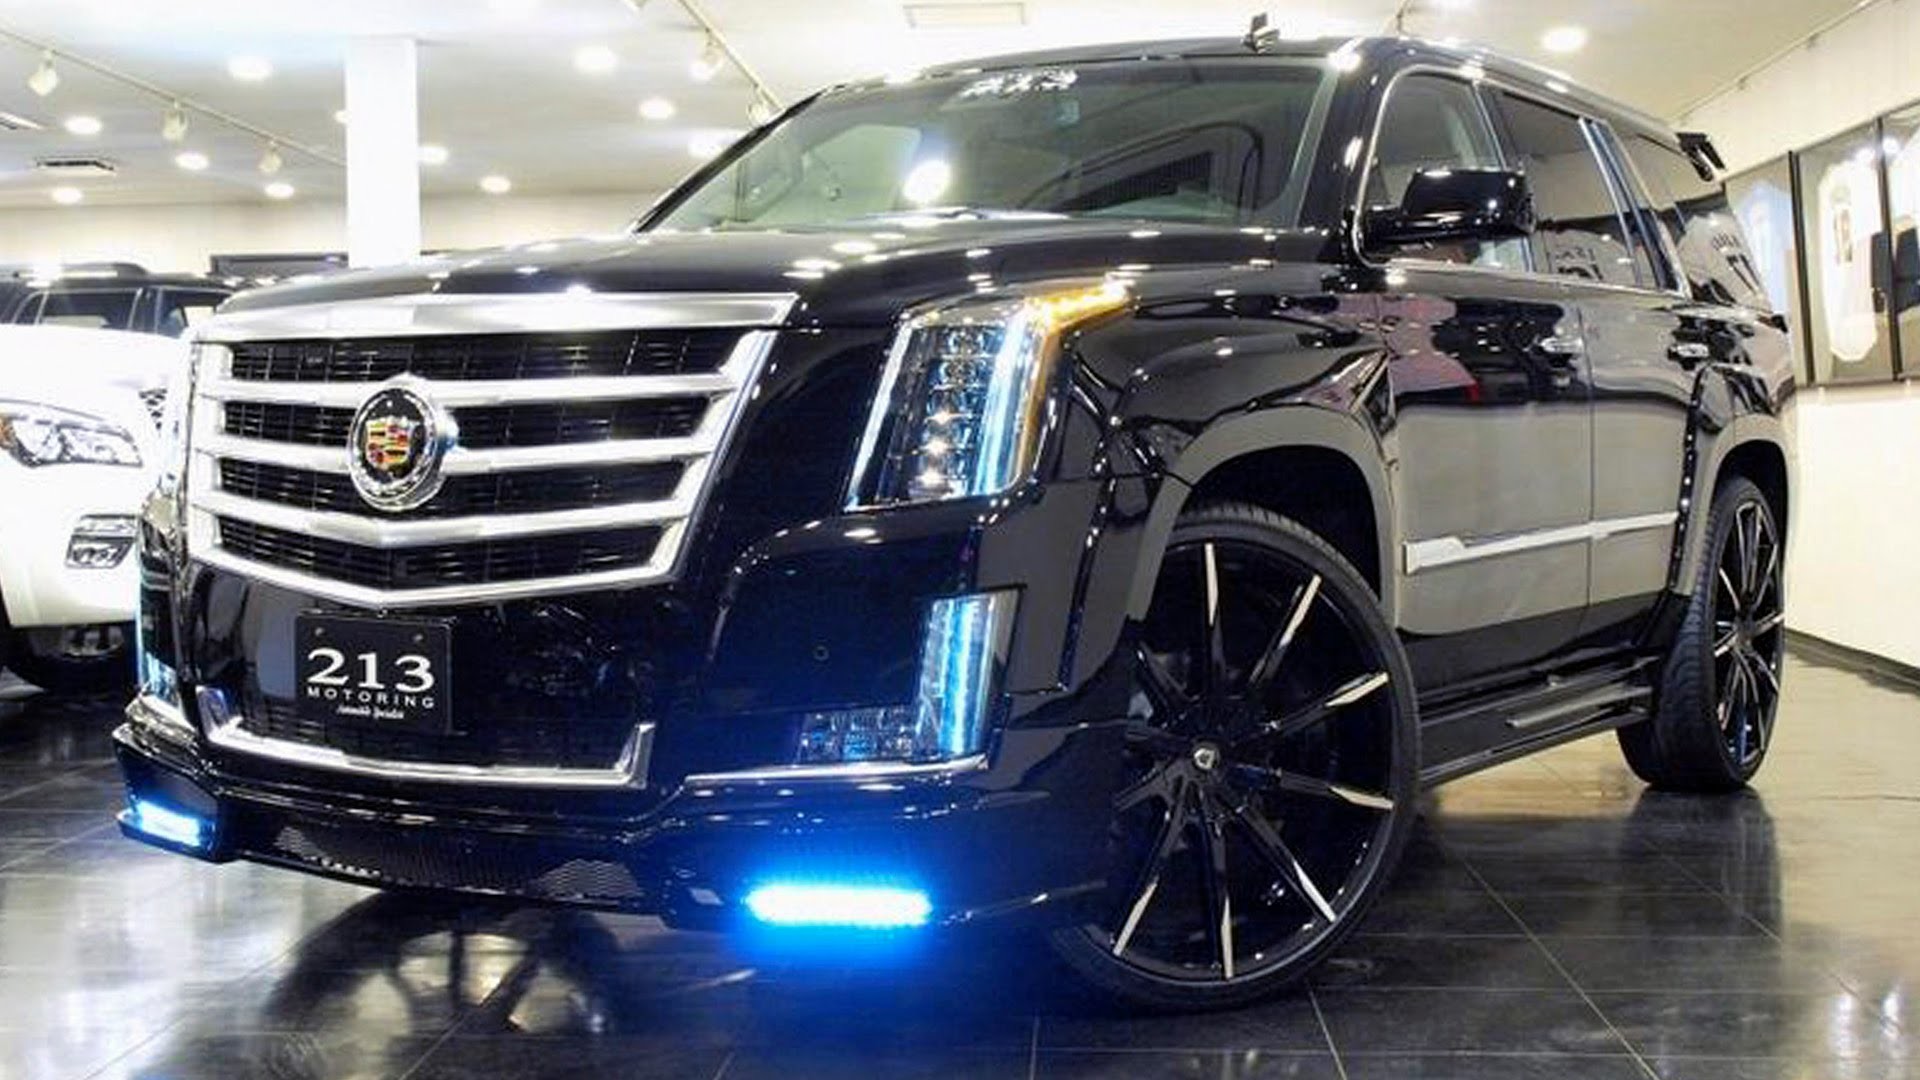 1920x1080 2015 Cadillac Escalade Picture Wallpapers